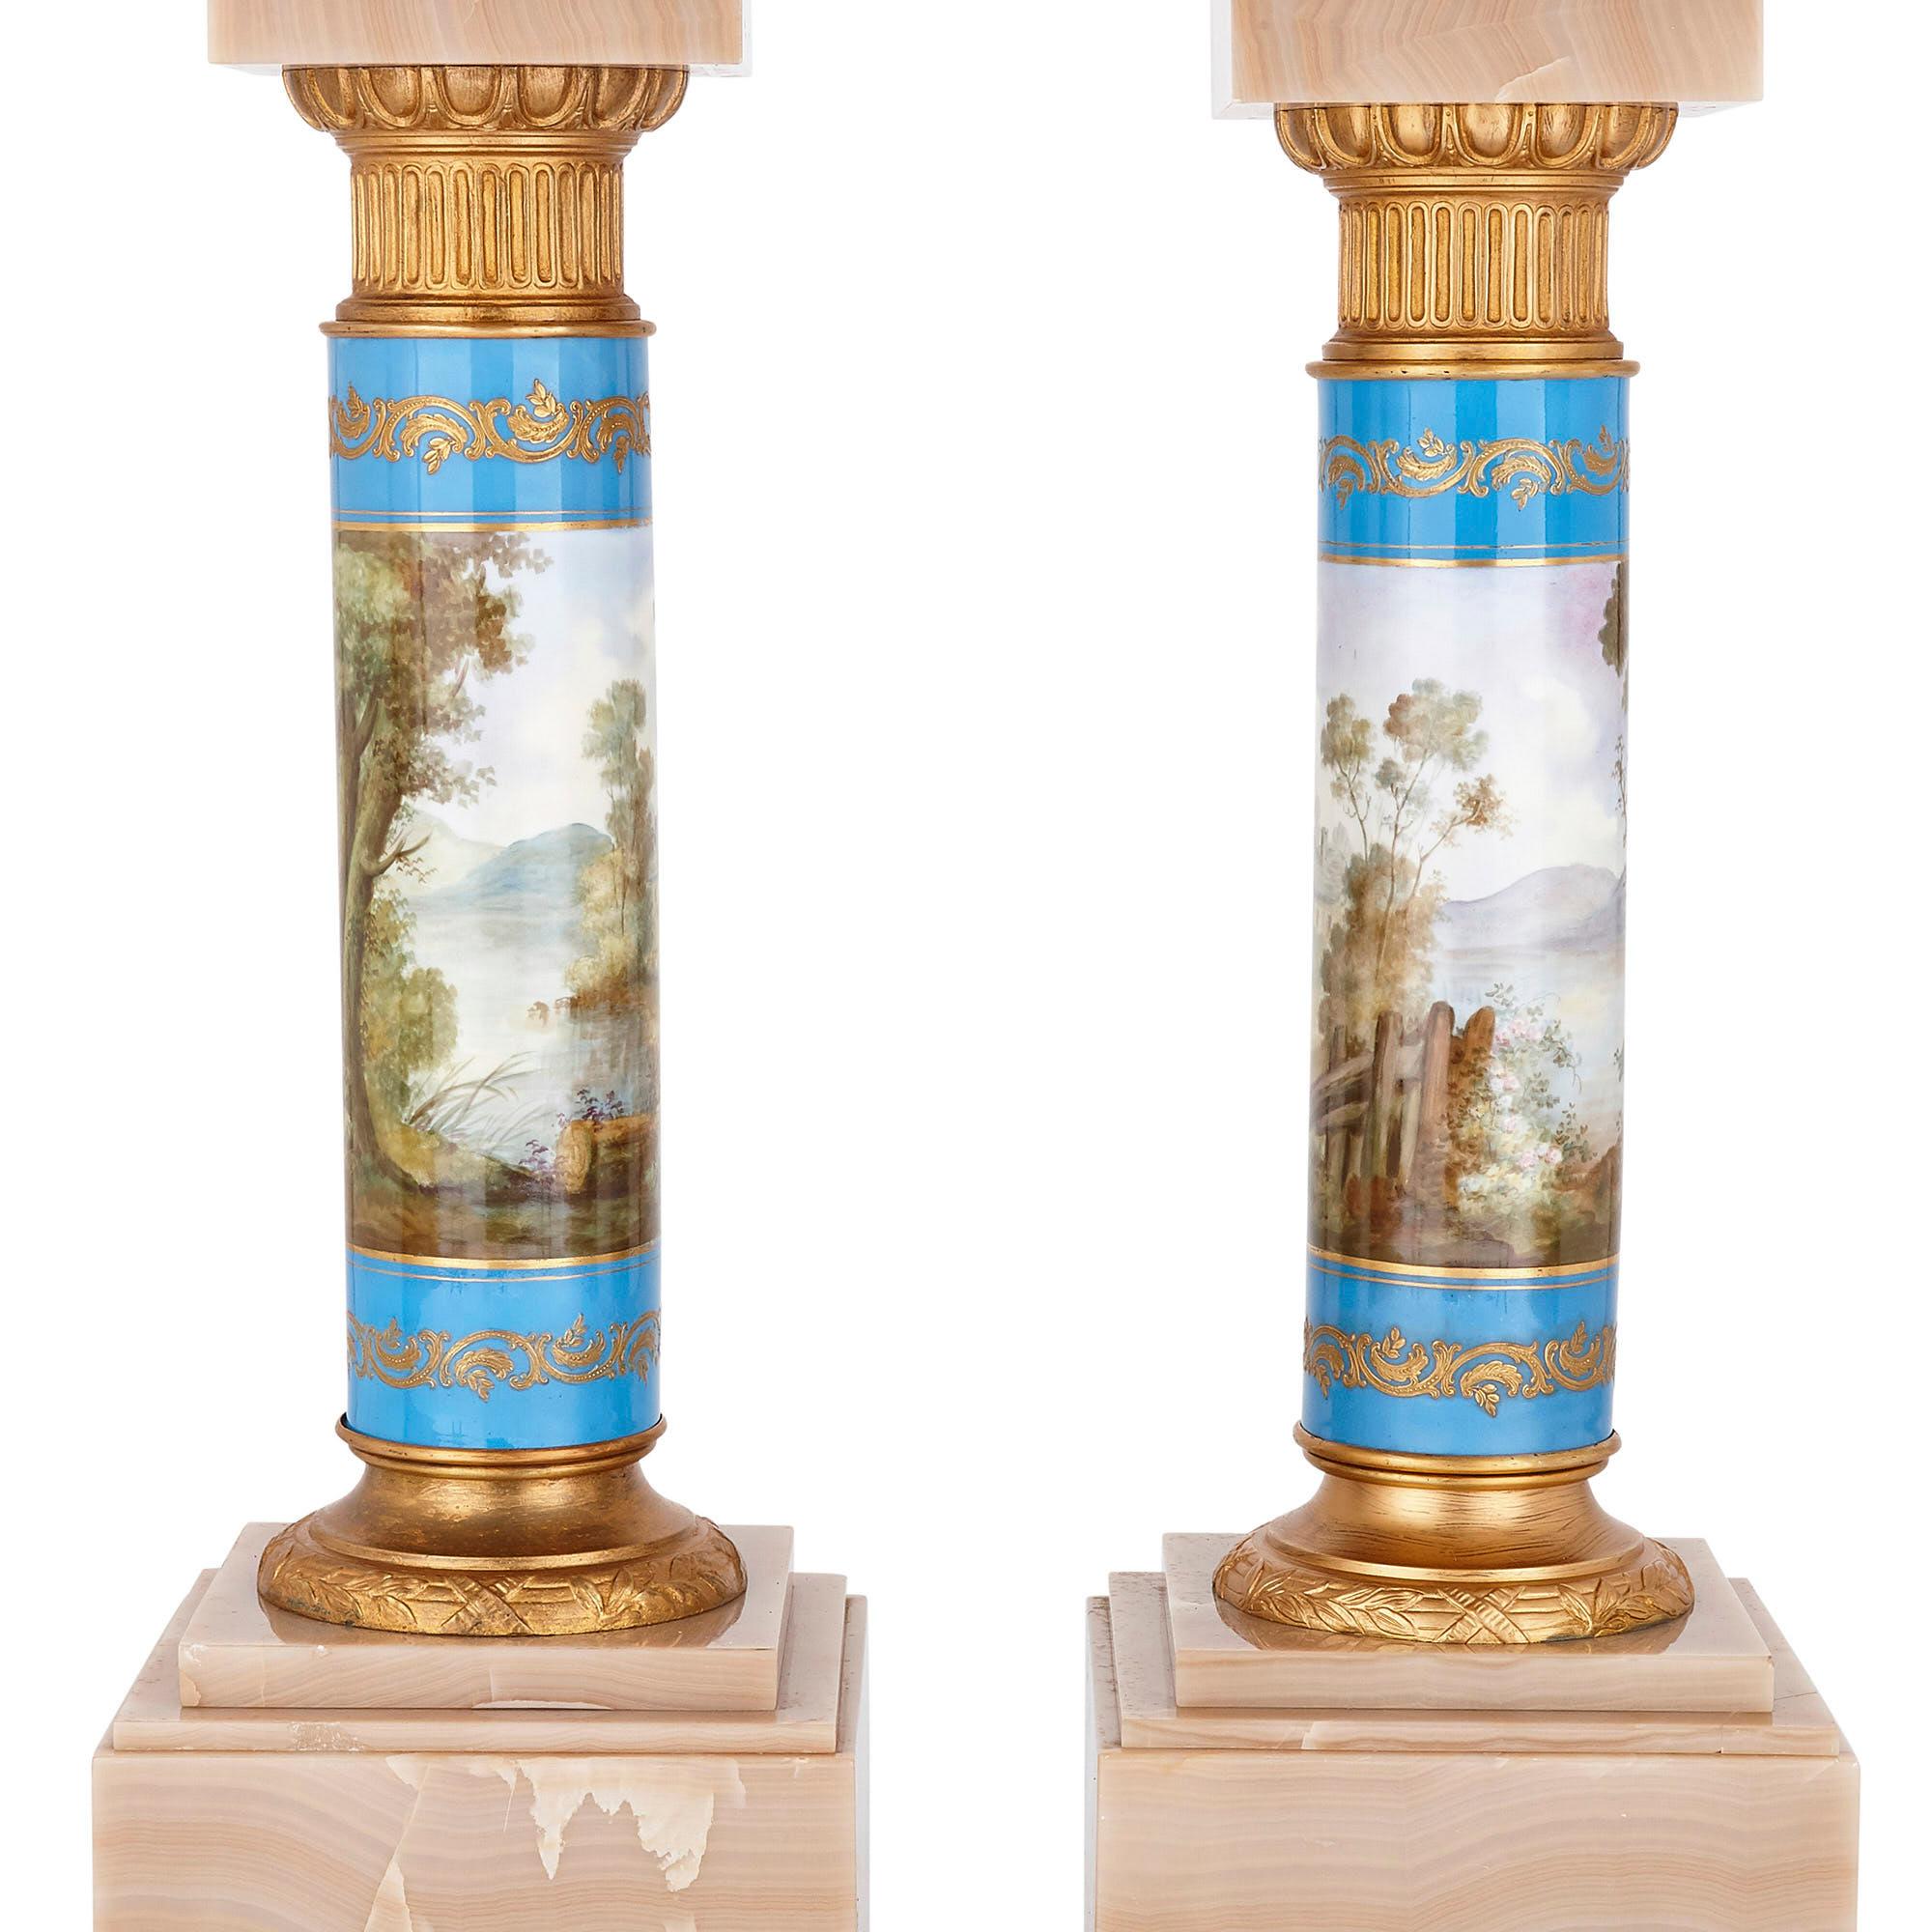 Pair of French Rococo style onyx and porcelain pedestals
French, c. 1900
Height 83cm, width 32cm, depth 32cm

Each pedestal in this pair features a veined onyx plinth-form base and a stepped onyx top. The base and top are connected by an